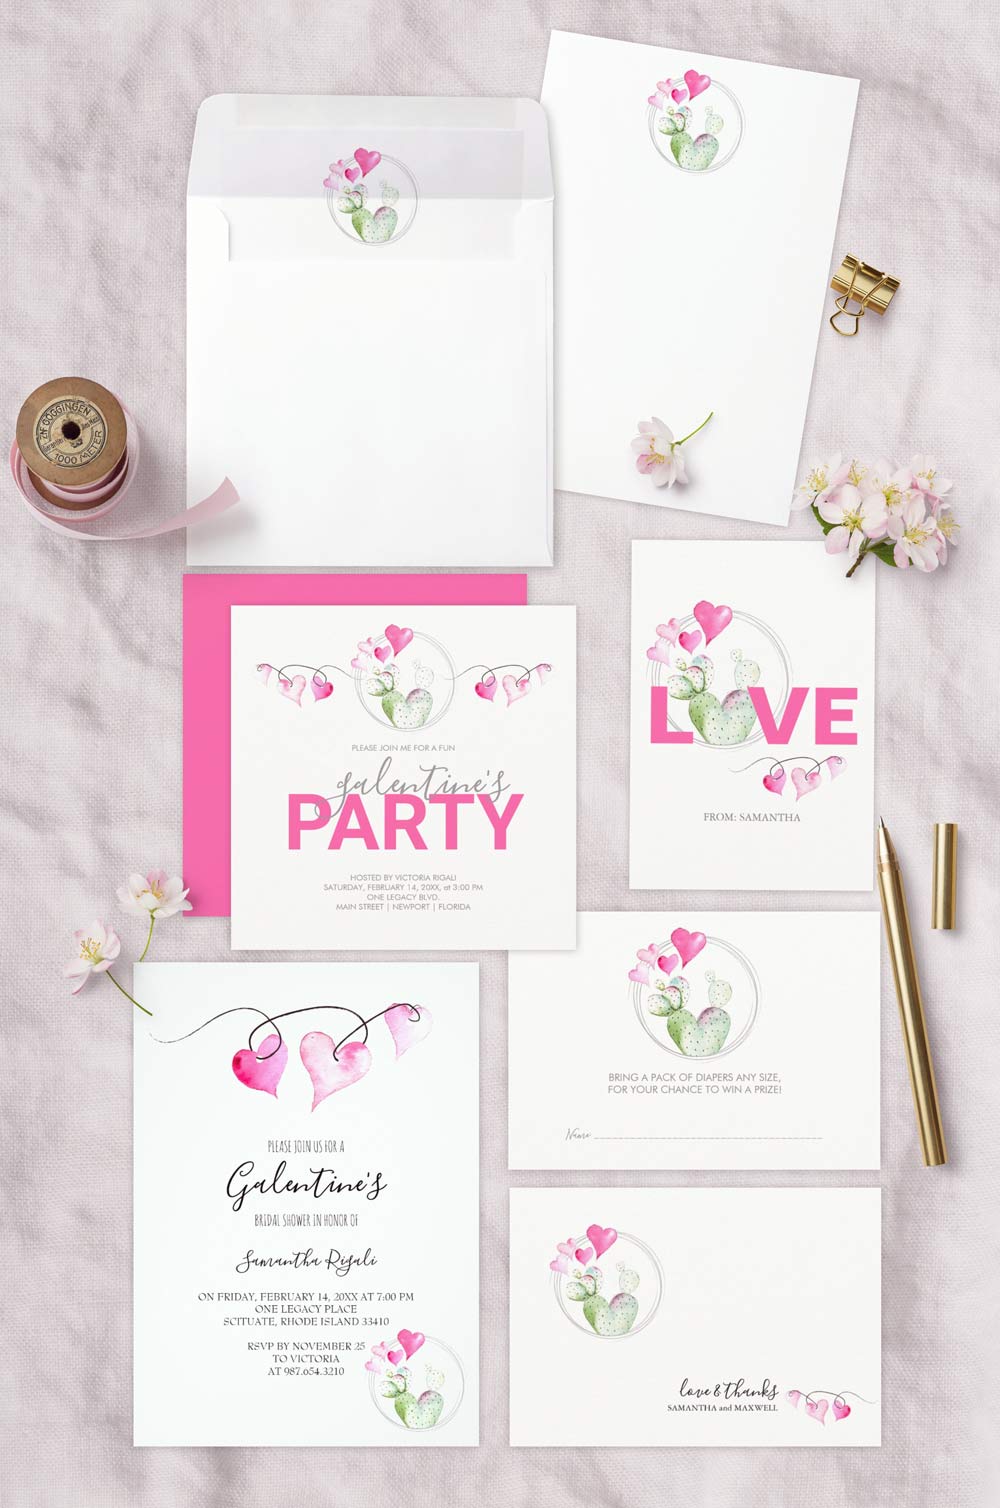 My stationery design in a replica watercolor heart shaped cactus encircled by watercolor hearts in shades of pink and green. 